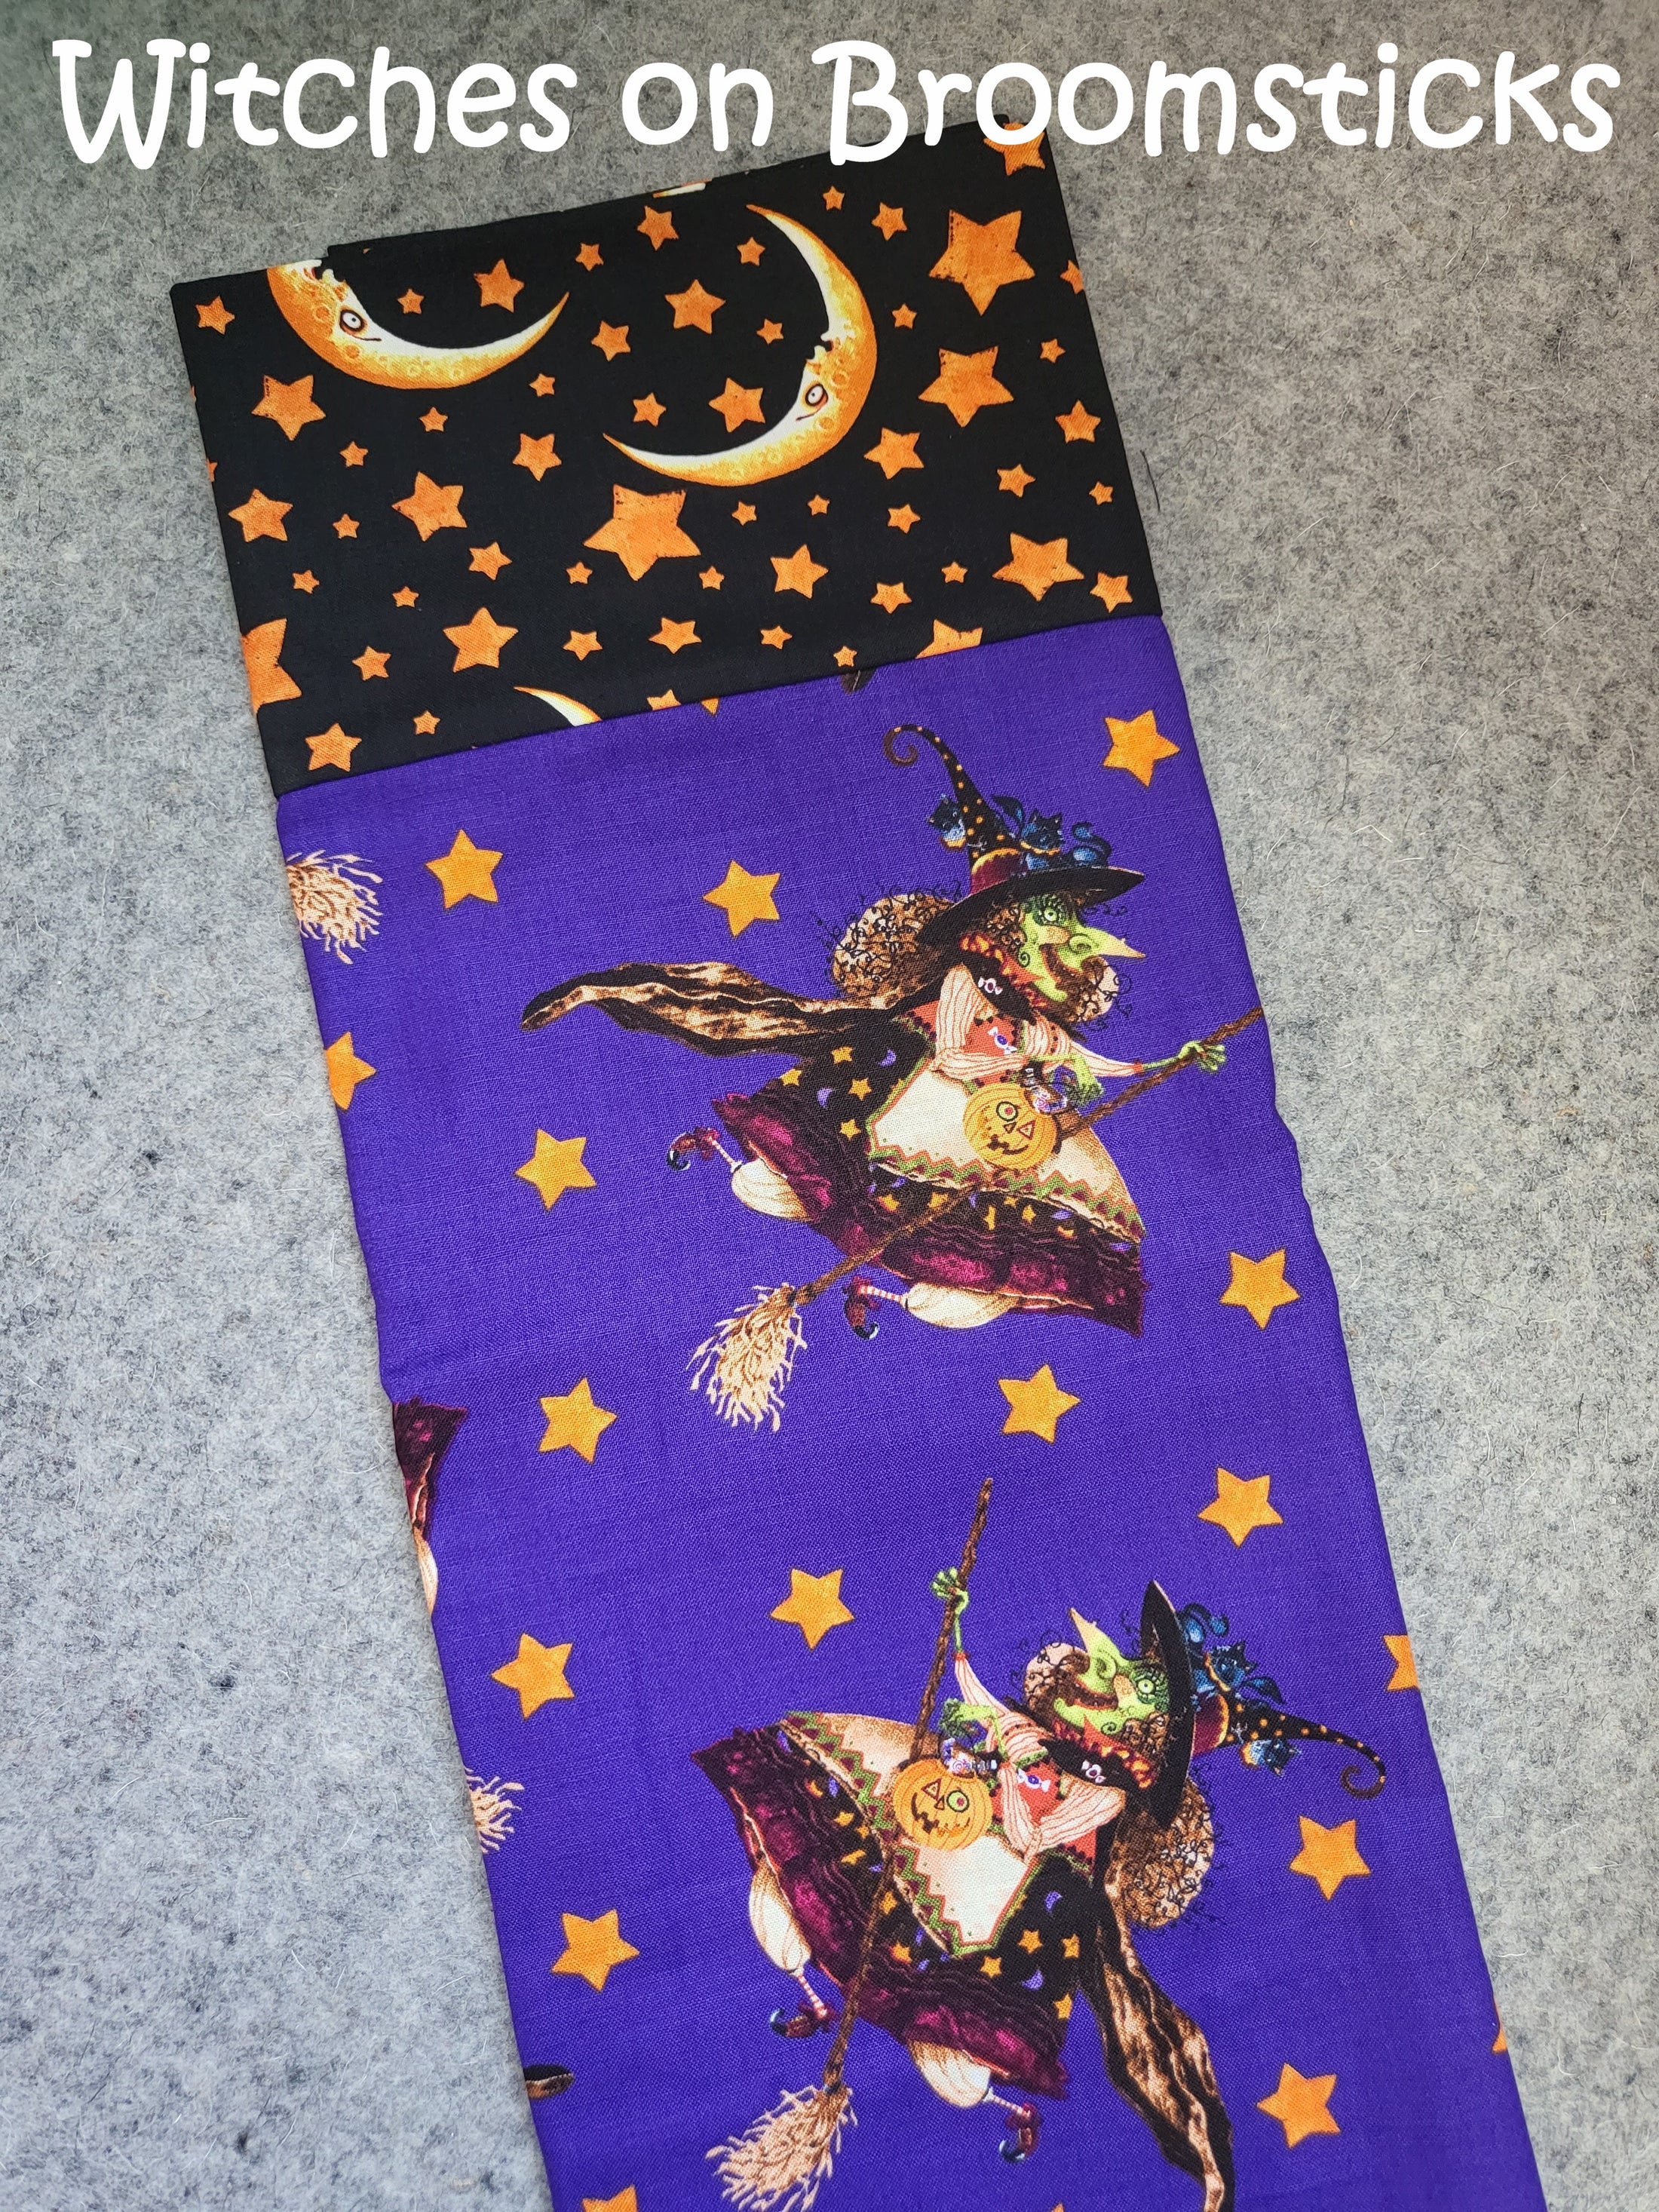 Witches on broomsticks halloween pillowcase.